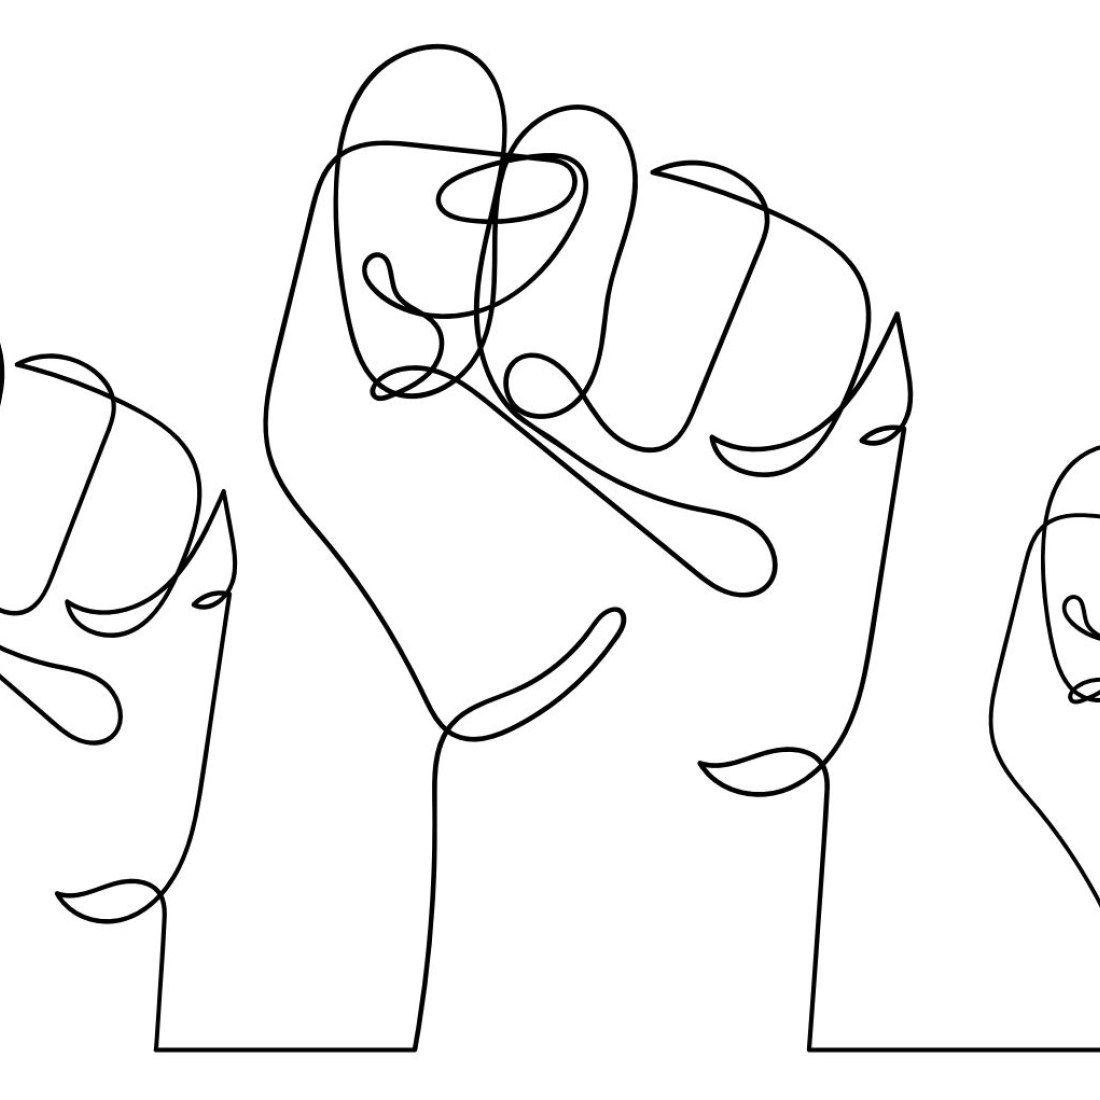 Sketch of three fists raised in the air.